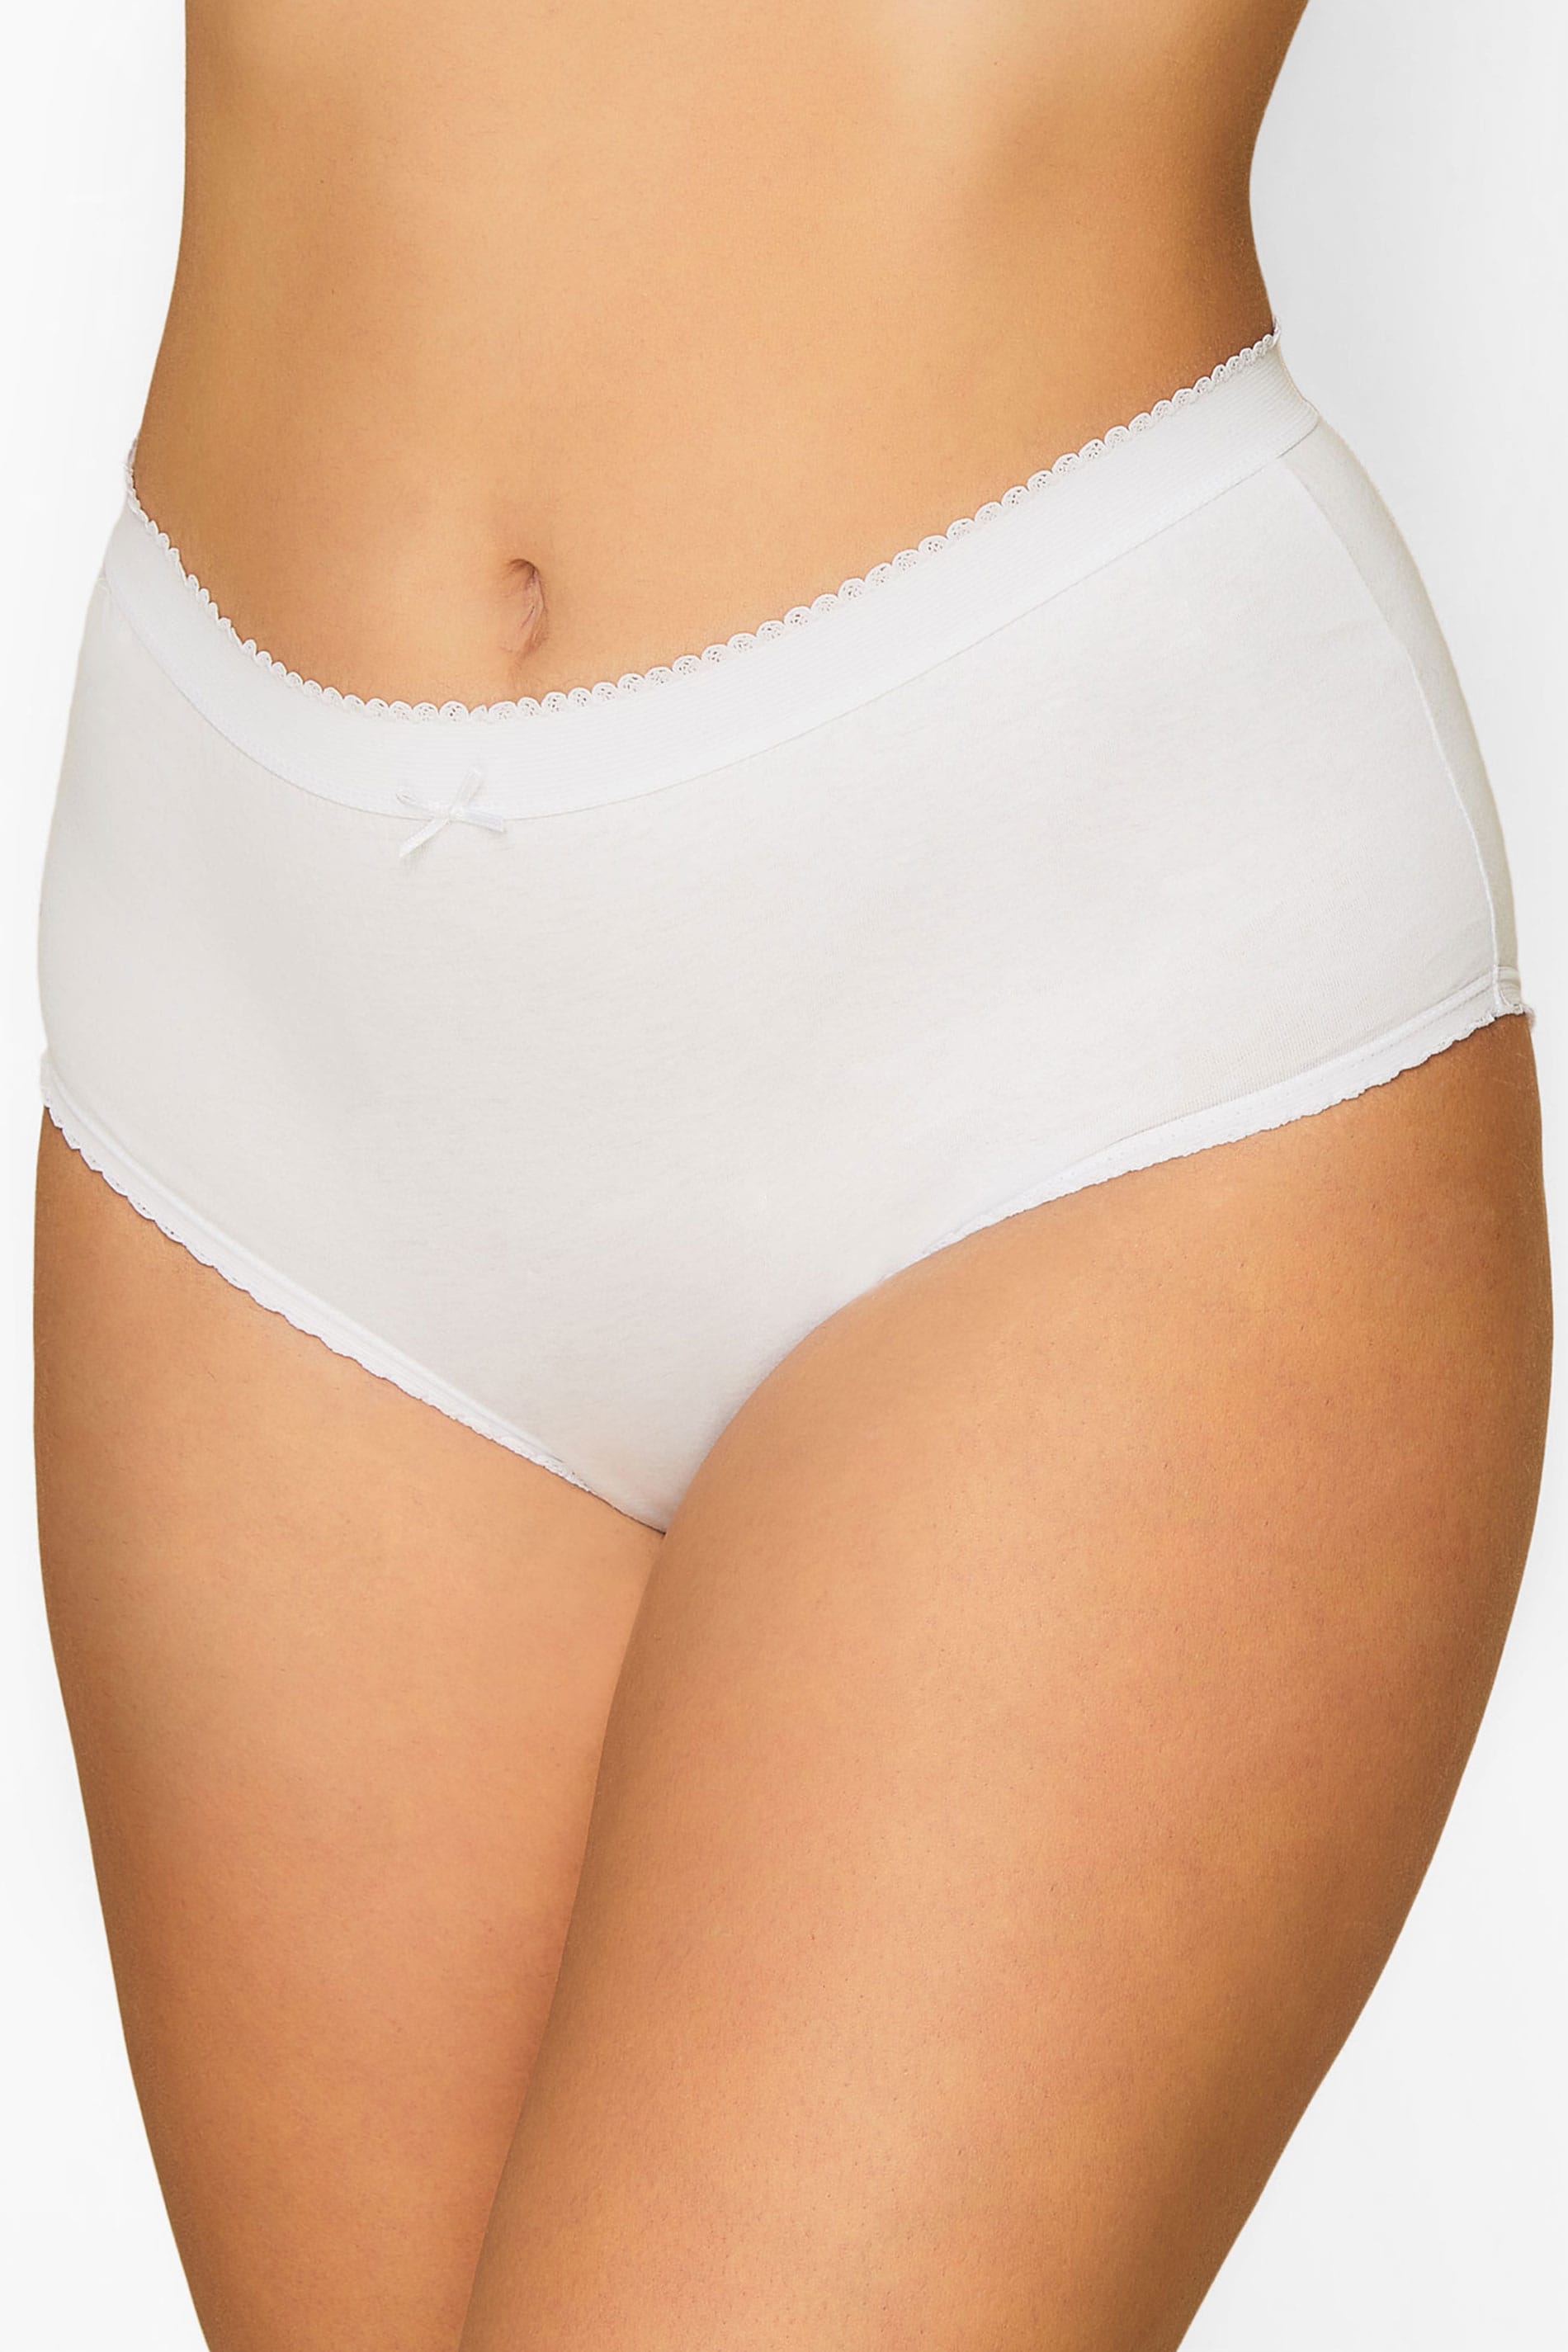 5 PACK Curve White Cotton High Waisted Full Briefs | Yours Clothing 2